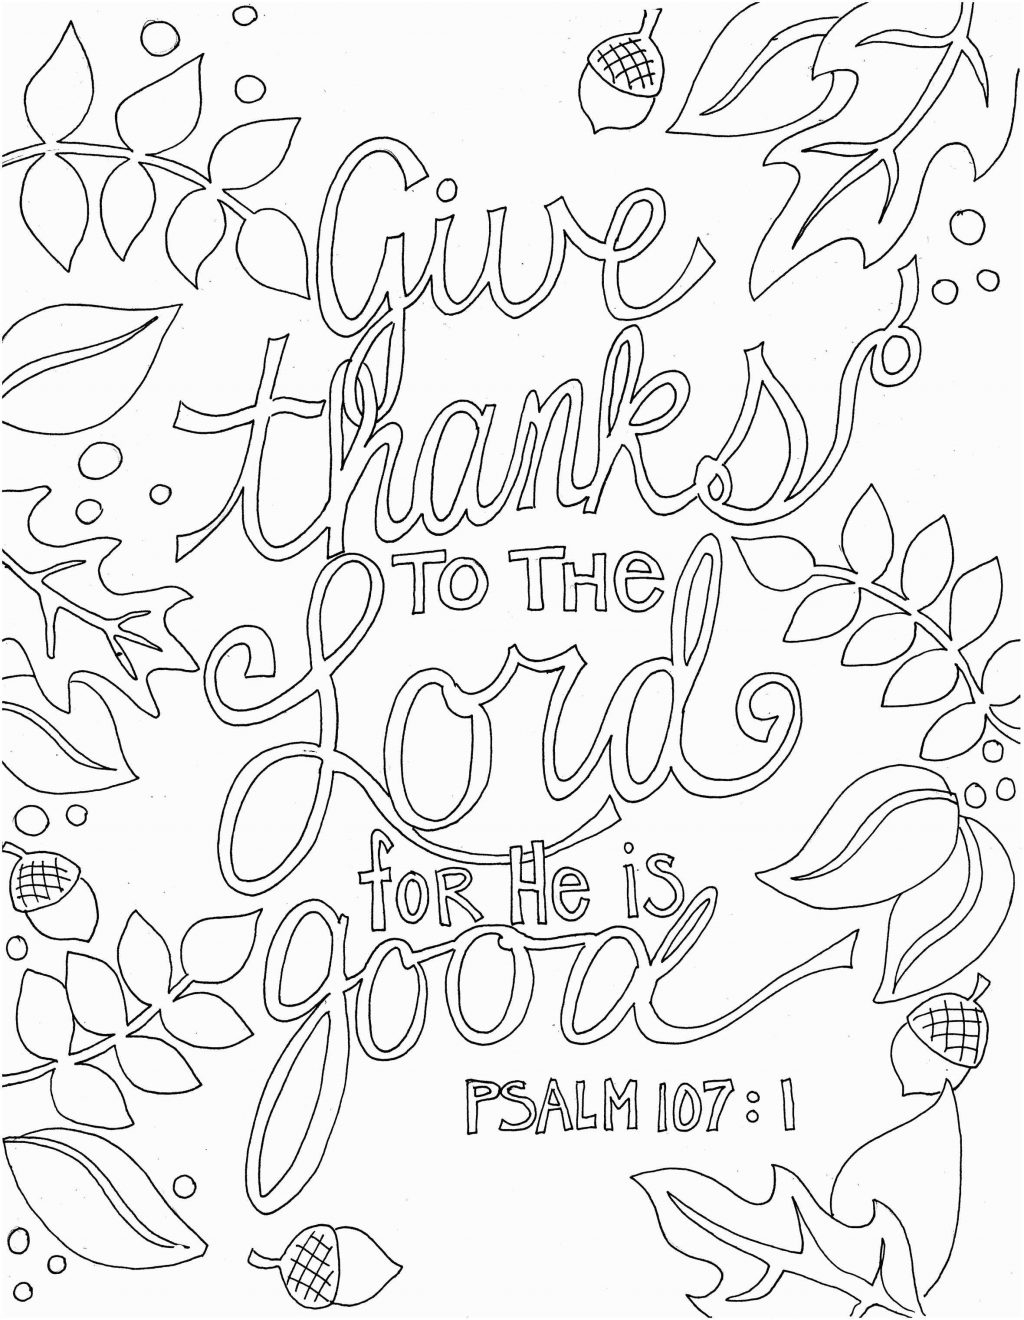 Coloring Pages ~ Free Printable Sunday School Coloring Pages Bible - Free Printable Sunday School Coloring Pages